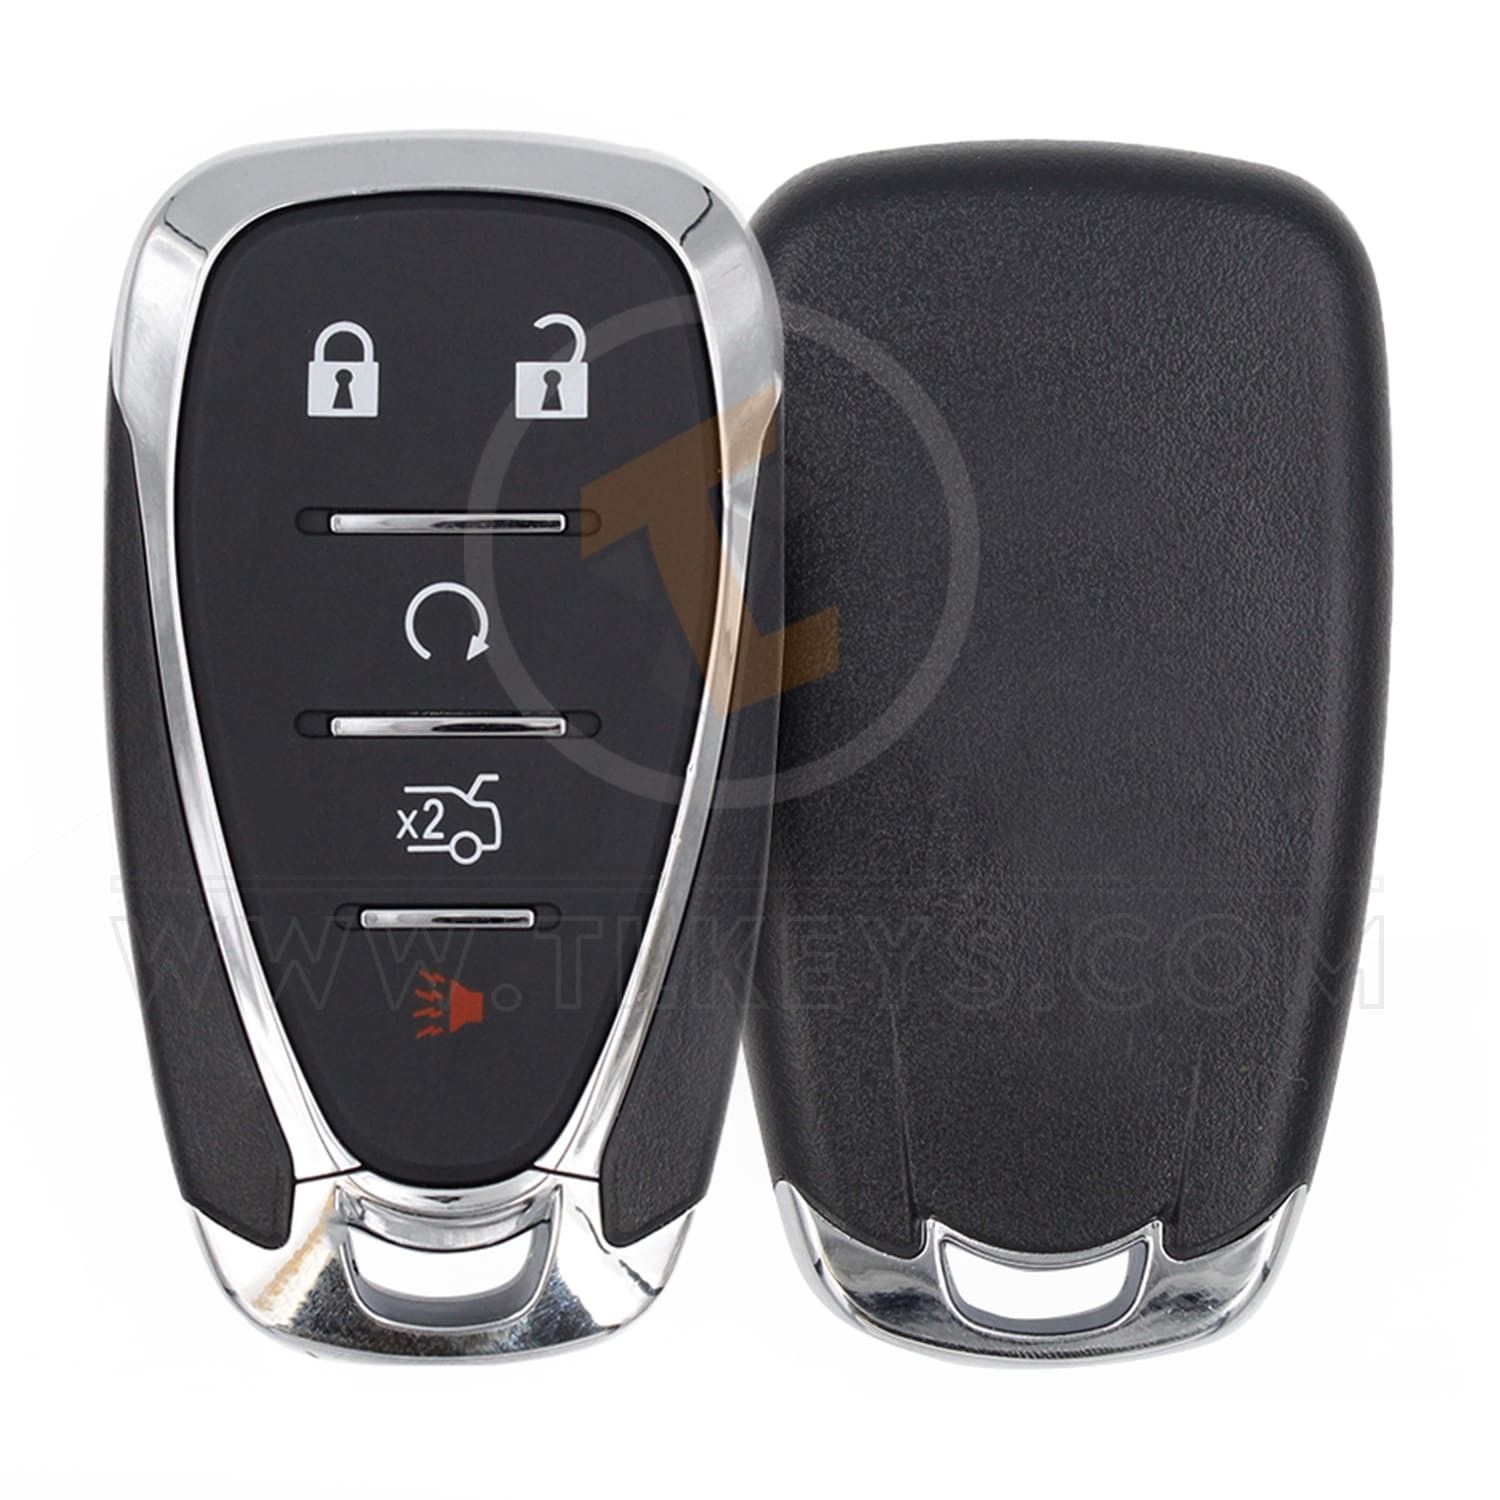  Chevrolet Smart Proximity 2015 2020 315MHz 5 Buttons Frequency 315MHz